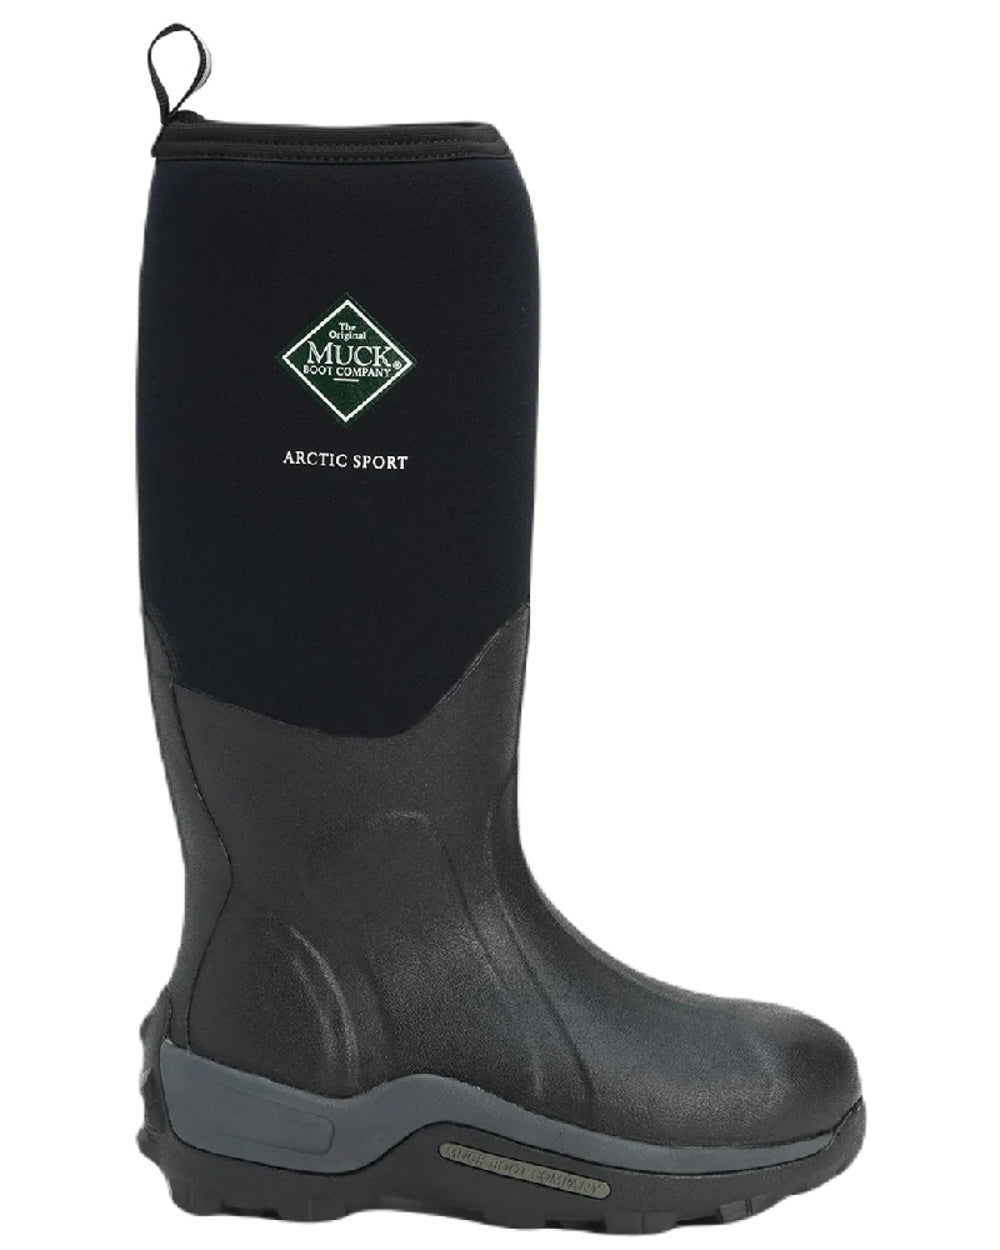 Muck Boots Arctic Sport Tall Wellingtons in Black 